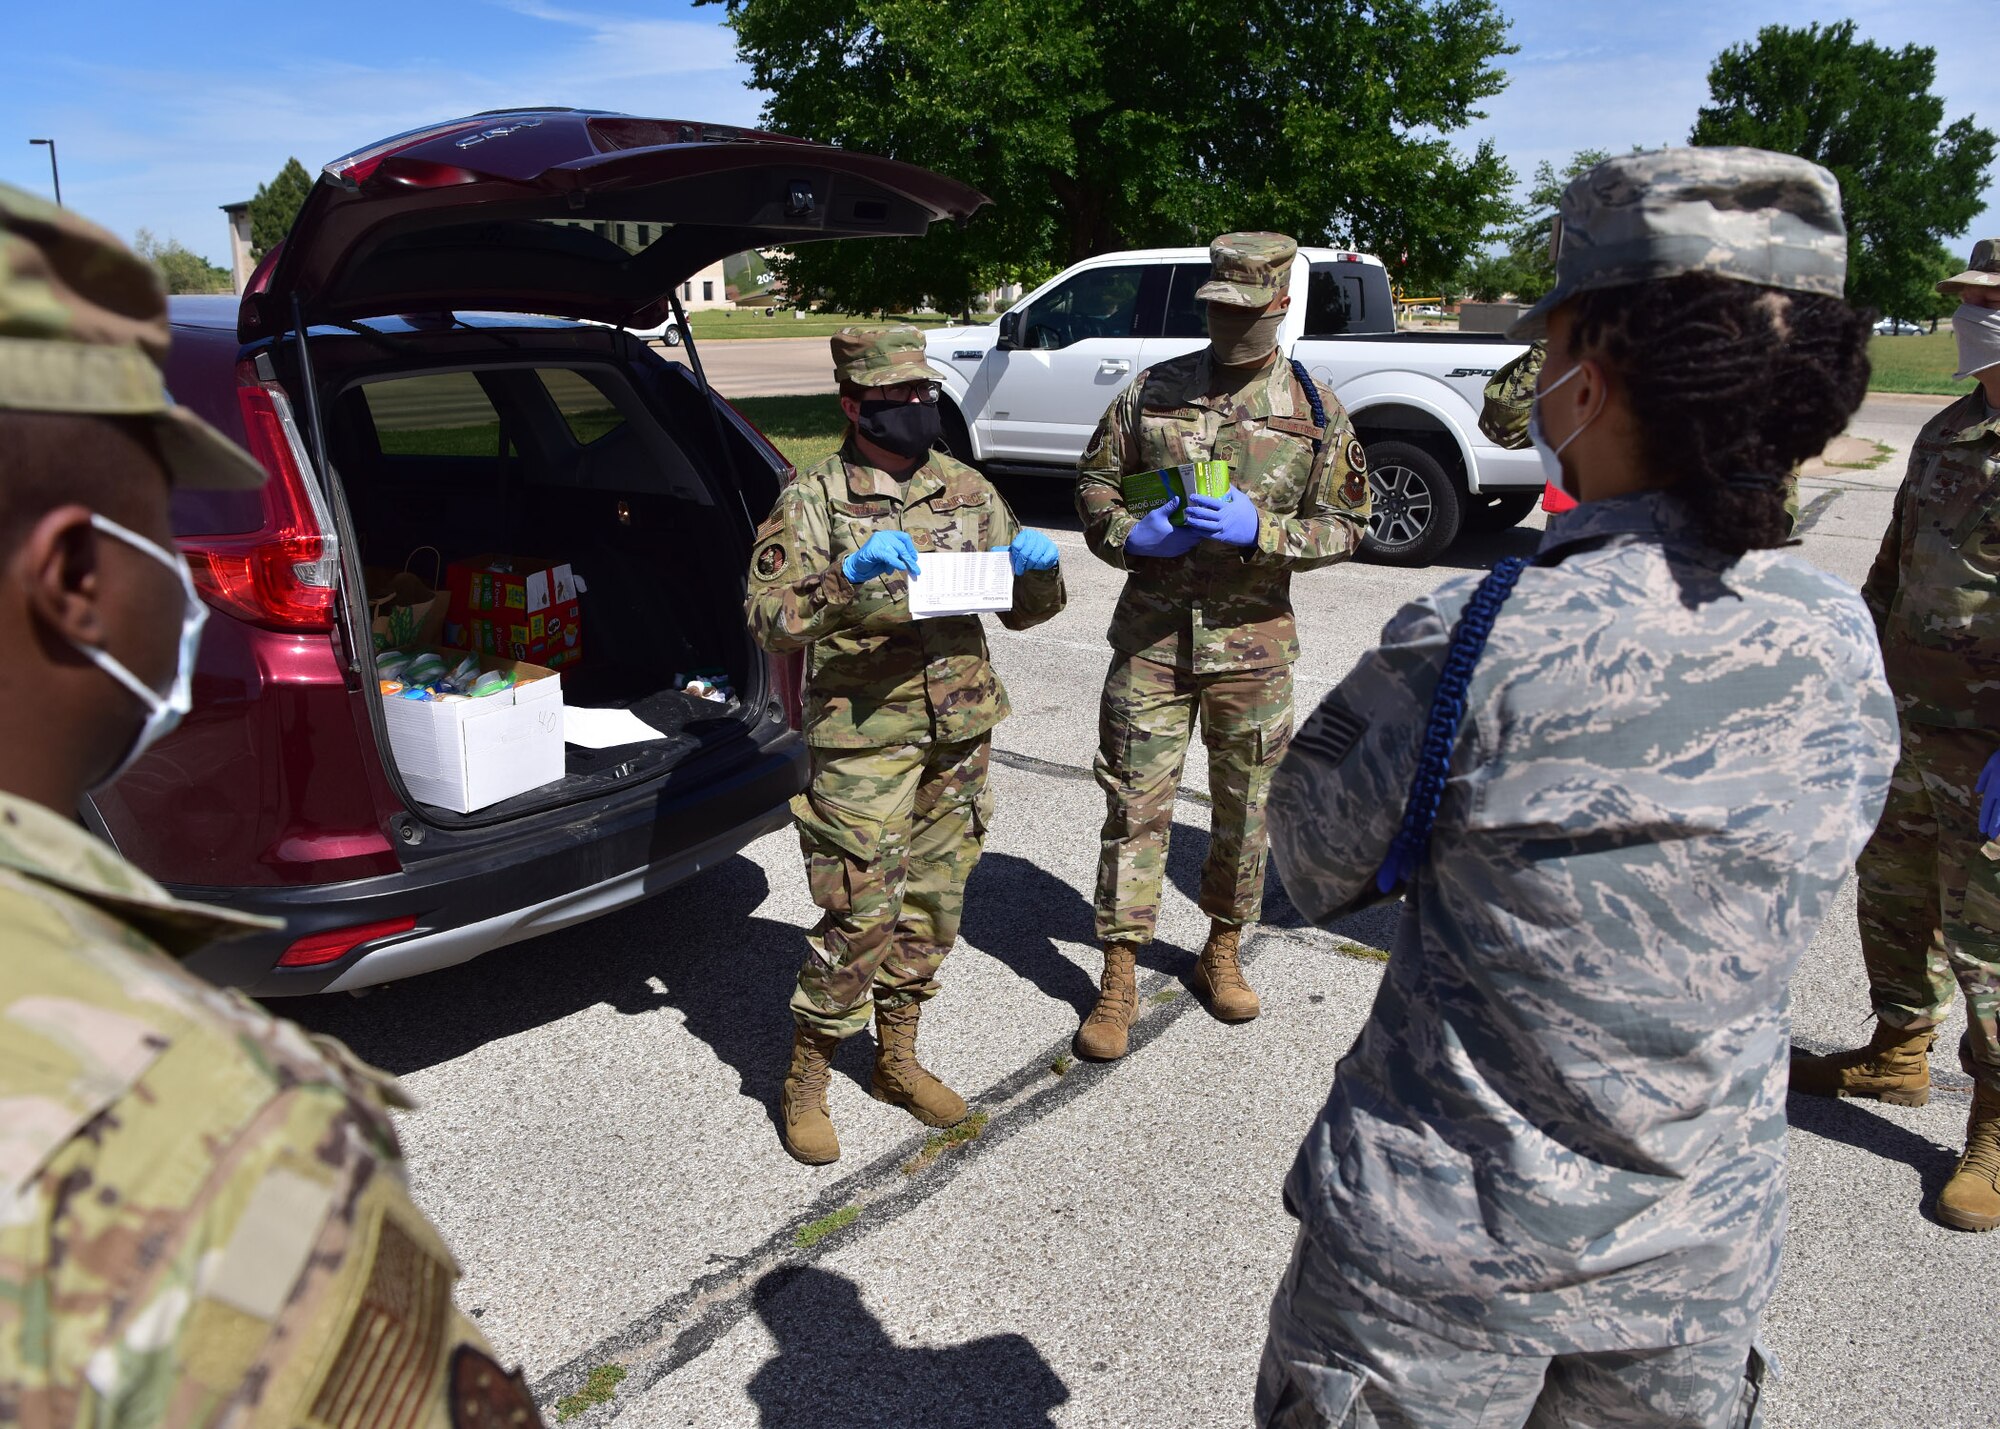 U.S. Air Force Tech. Sgt. Britteny Griffith, 17th Training Wing command chief executive assistant, briefs volunteers before delivering care packages to 17th TRW members in isolation on Goodfellow Air Force Base, Texas, April 20, 2020. Griffith is spearheading the base portion of the initiative, which is a joint project between the base and local civic leaders to ensure inbound members are taken care of during their mandatory isolation period as a result of the COVID-19 pandemic. (U.S. Air Force photo by Staff Sgt. Chad Warren)